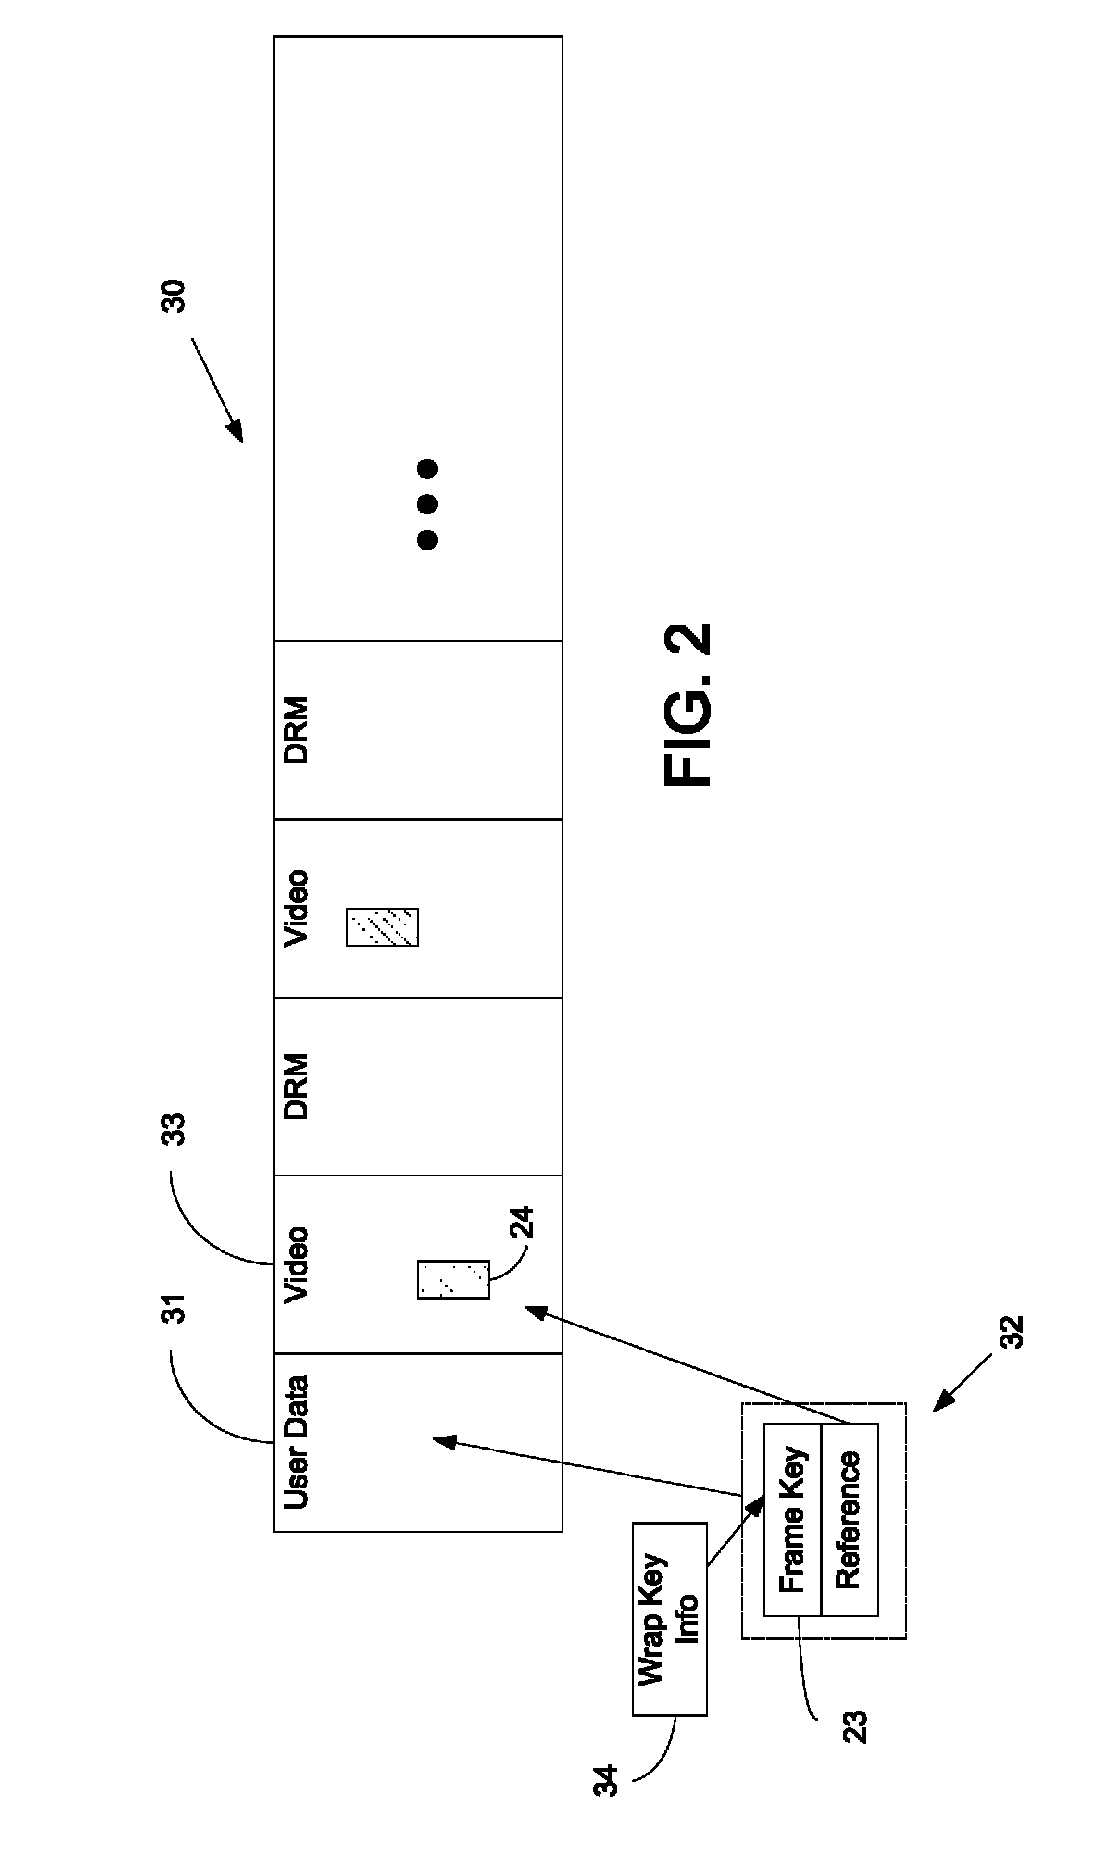 Elementary bitstream cryptographic material transport systems and methods